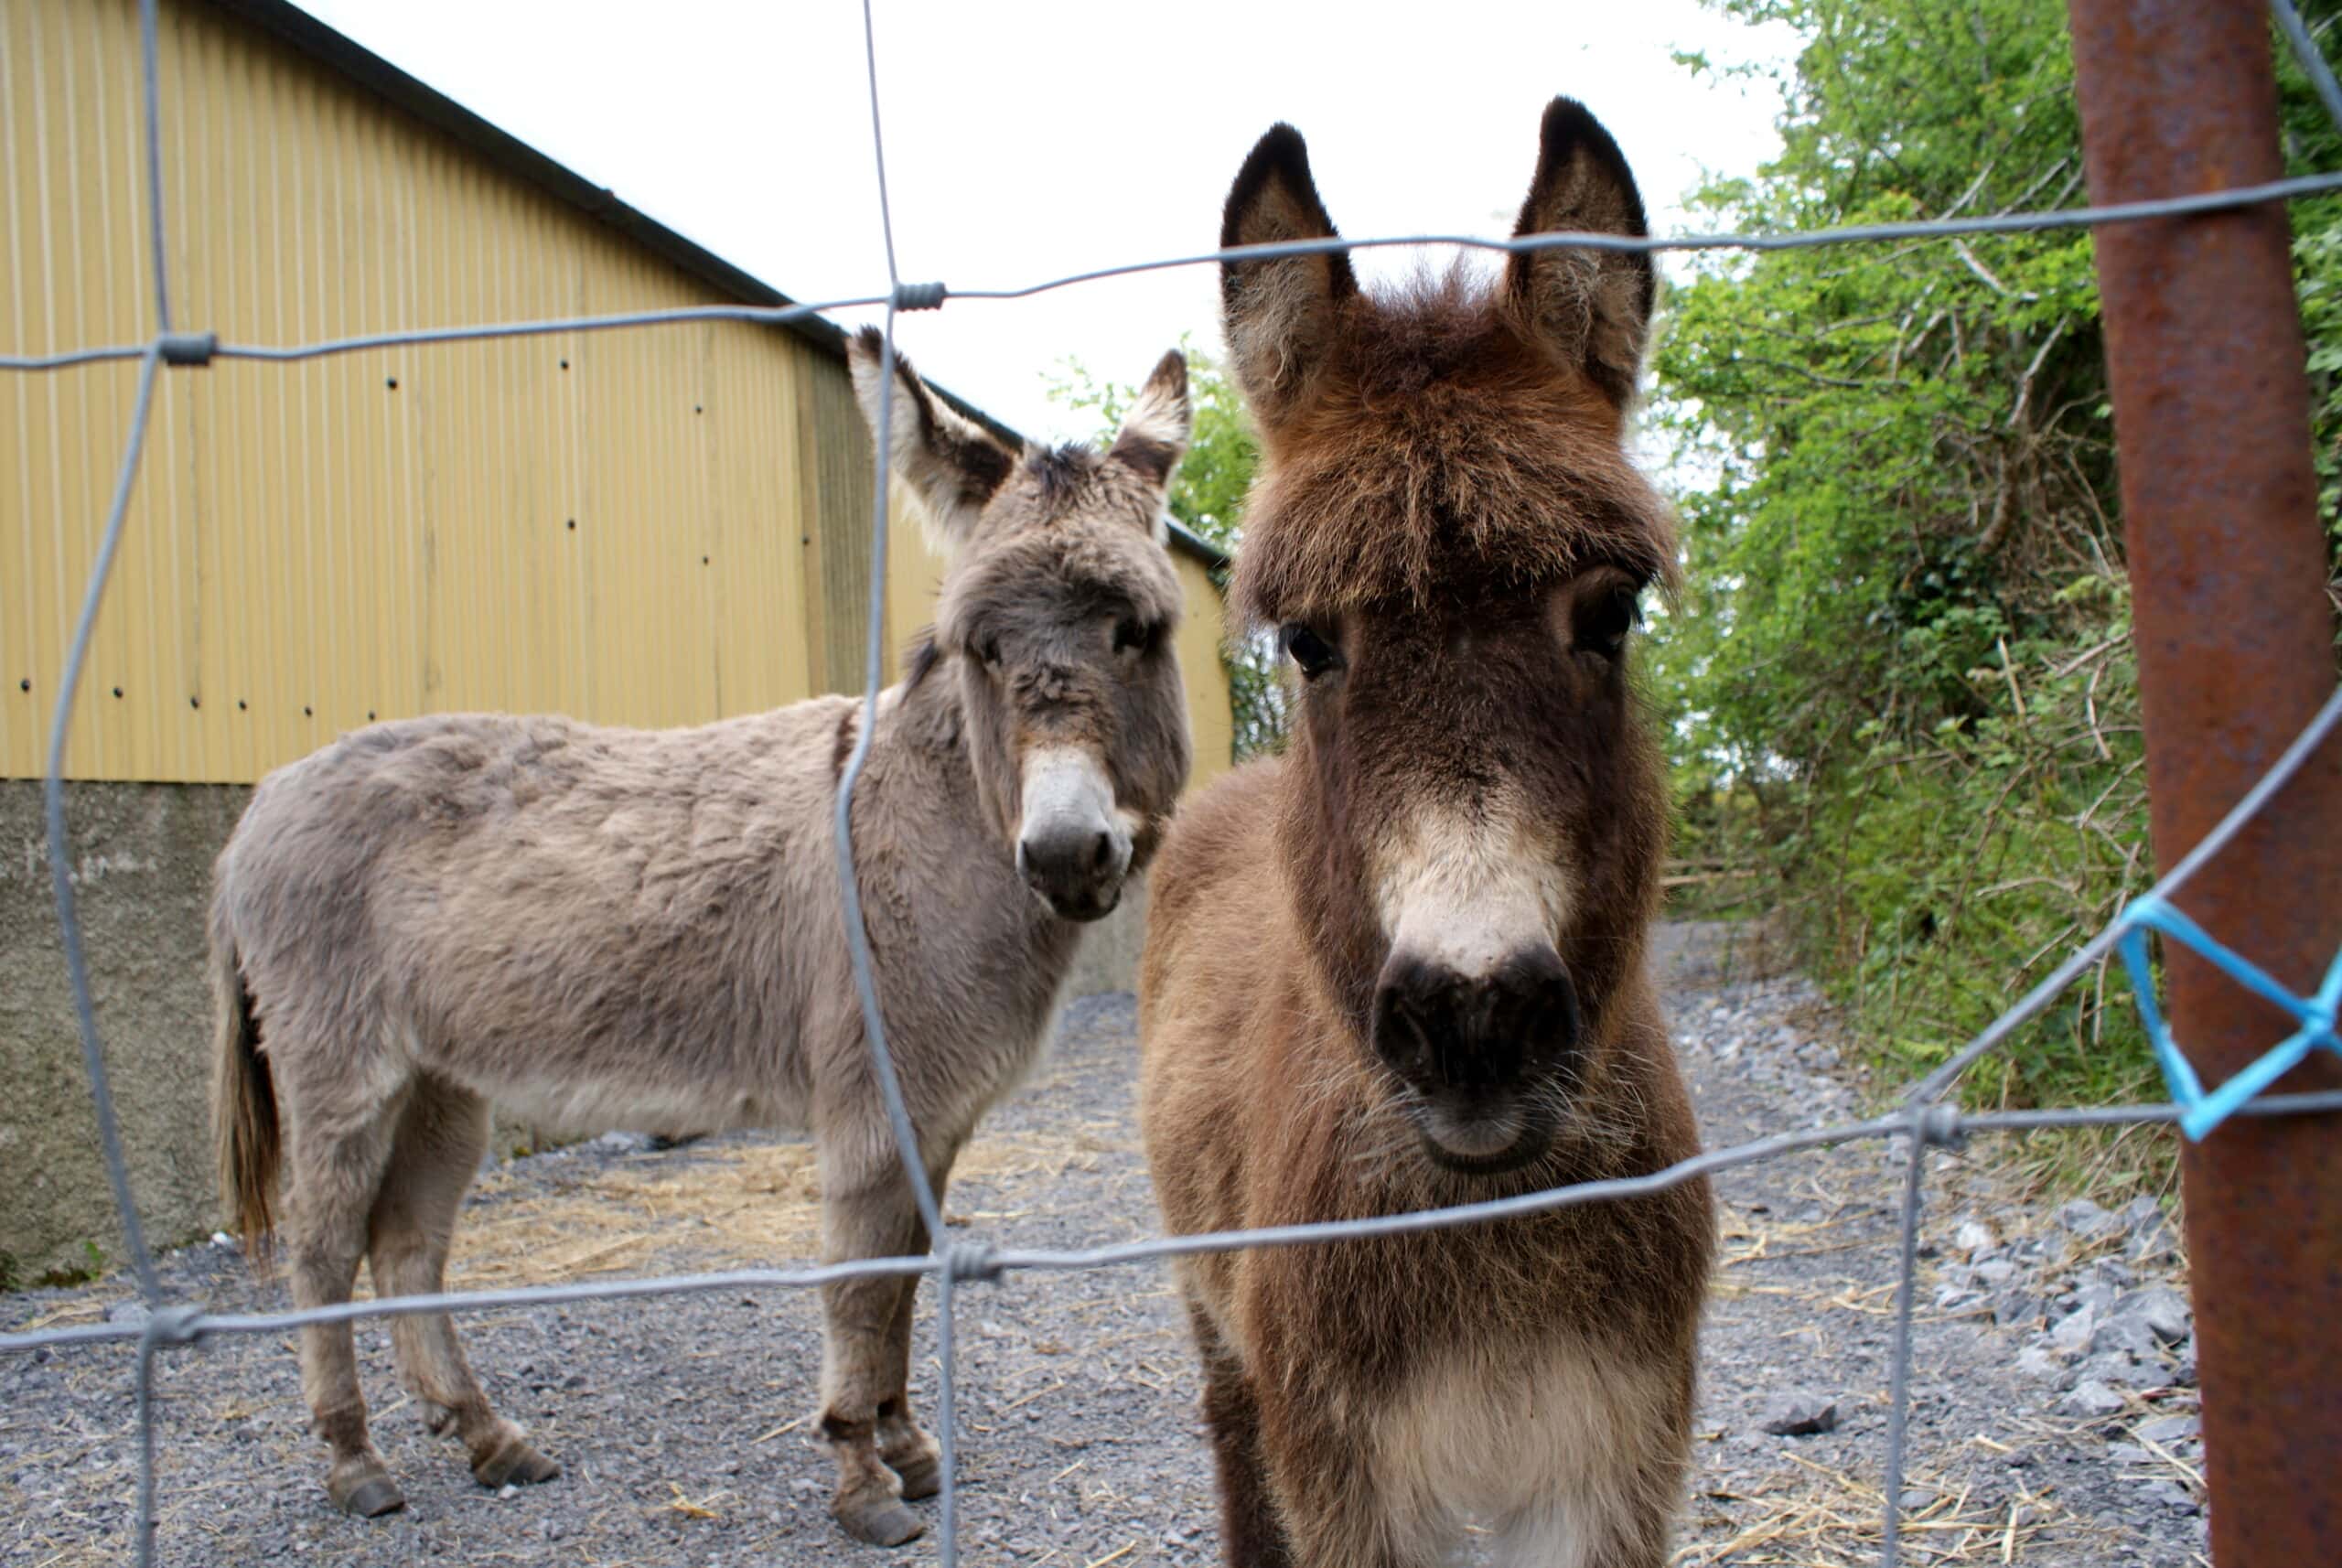 Curious baby hinny (mule) leaves mama donkey to look out the gate.